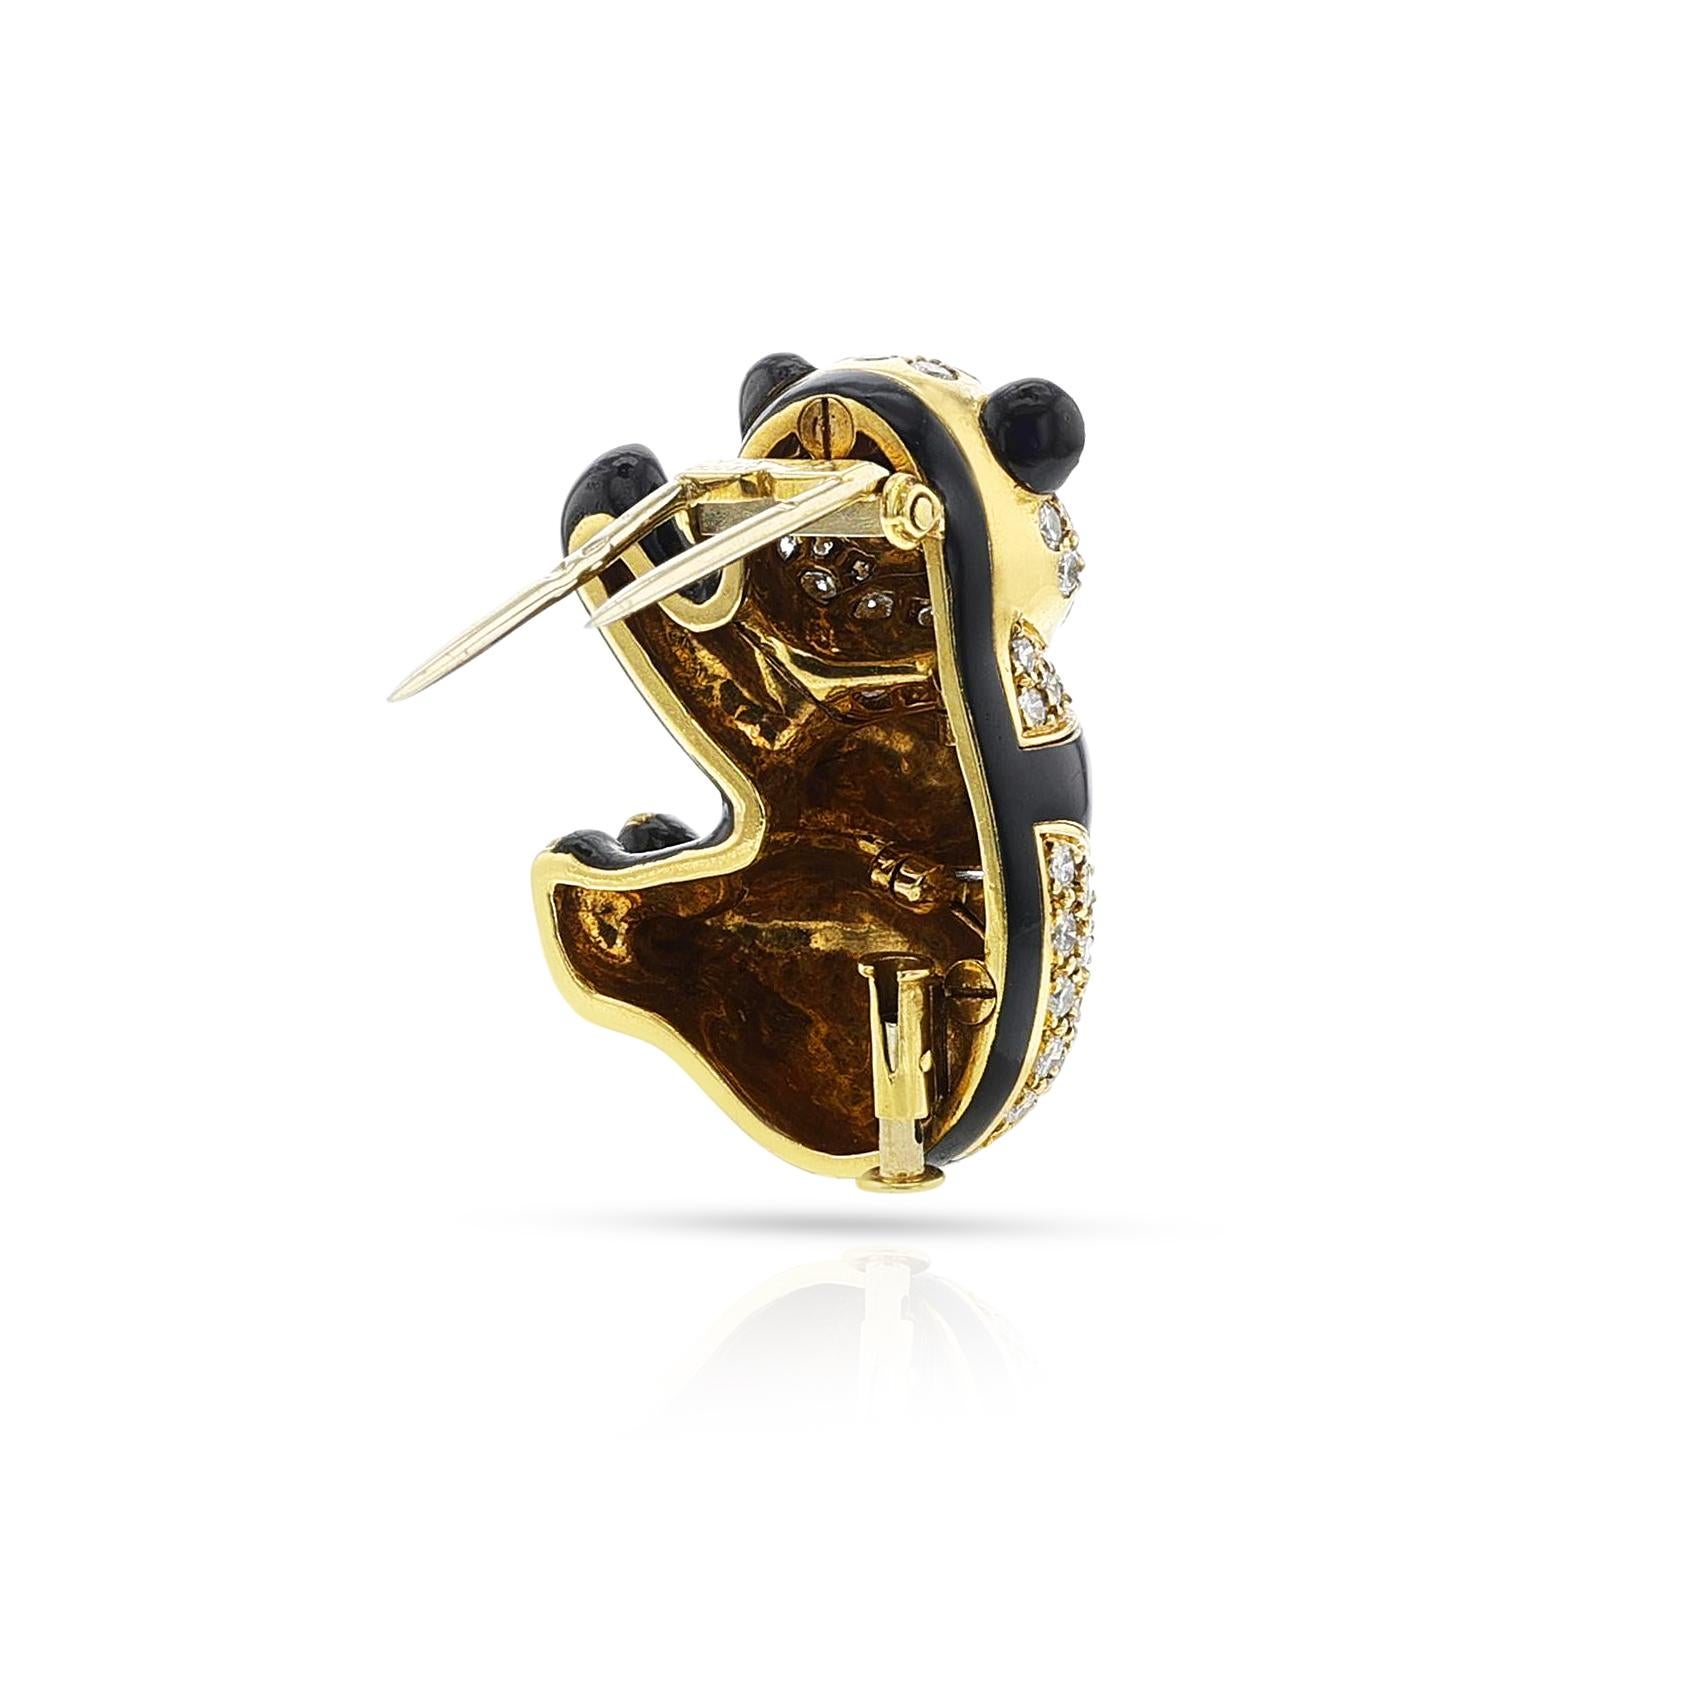 Van Cleef & Arpels Enamel and Diamond Panda Brooch, 18k In Excellent Condition For Sale In New York, NY